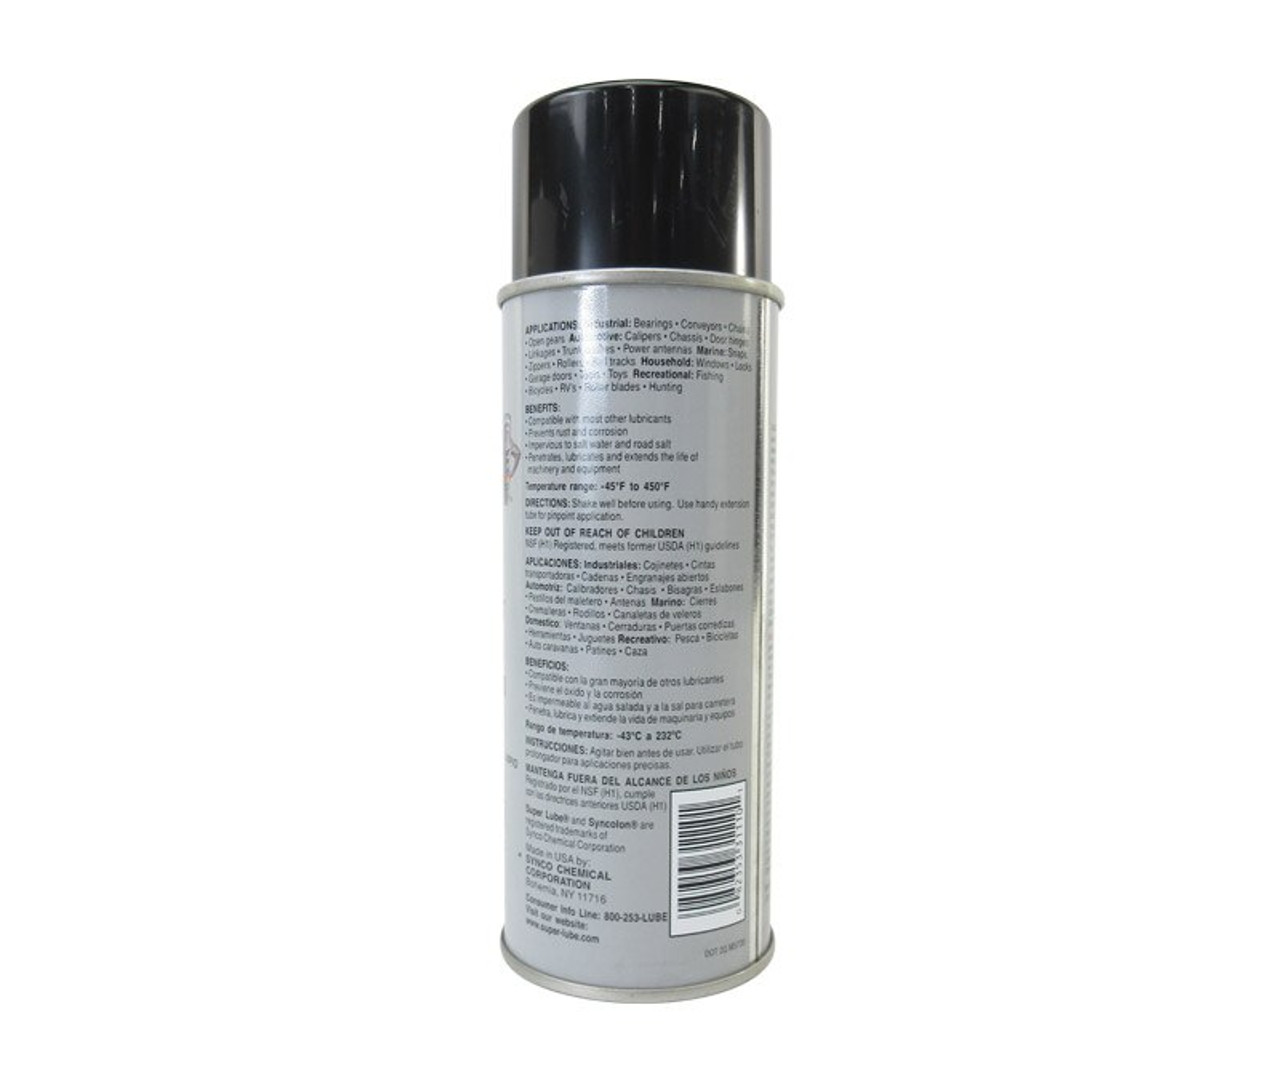 Super Lube Multi Purpose Synthetic Grease PTFE 41160 400g for sale online